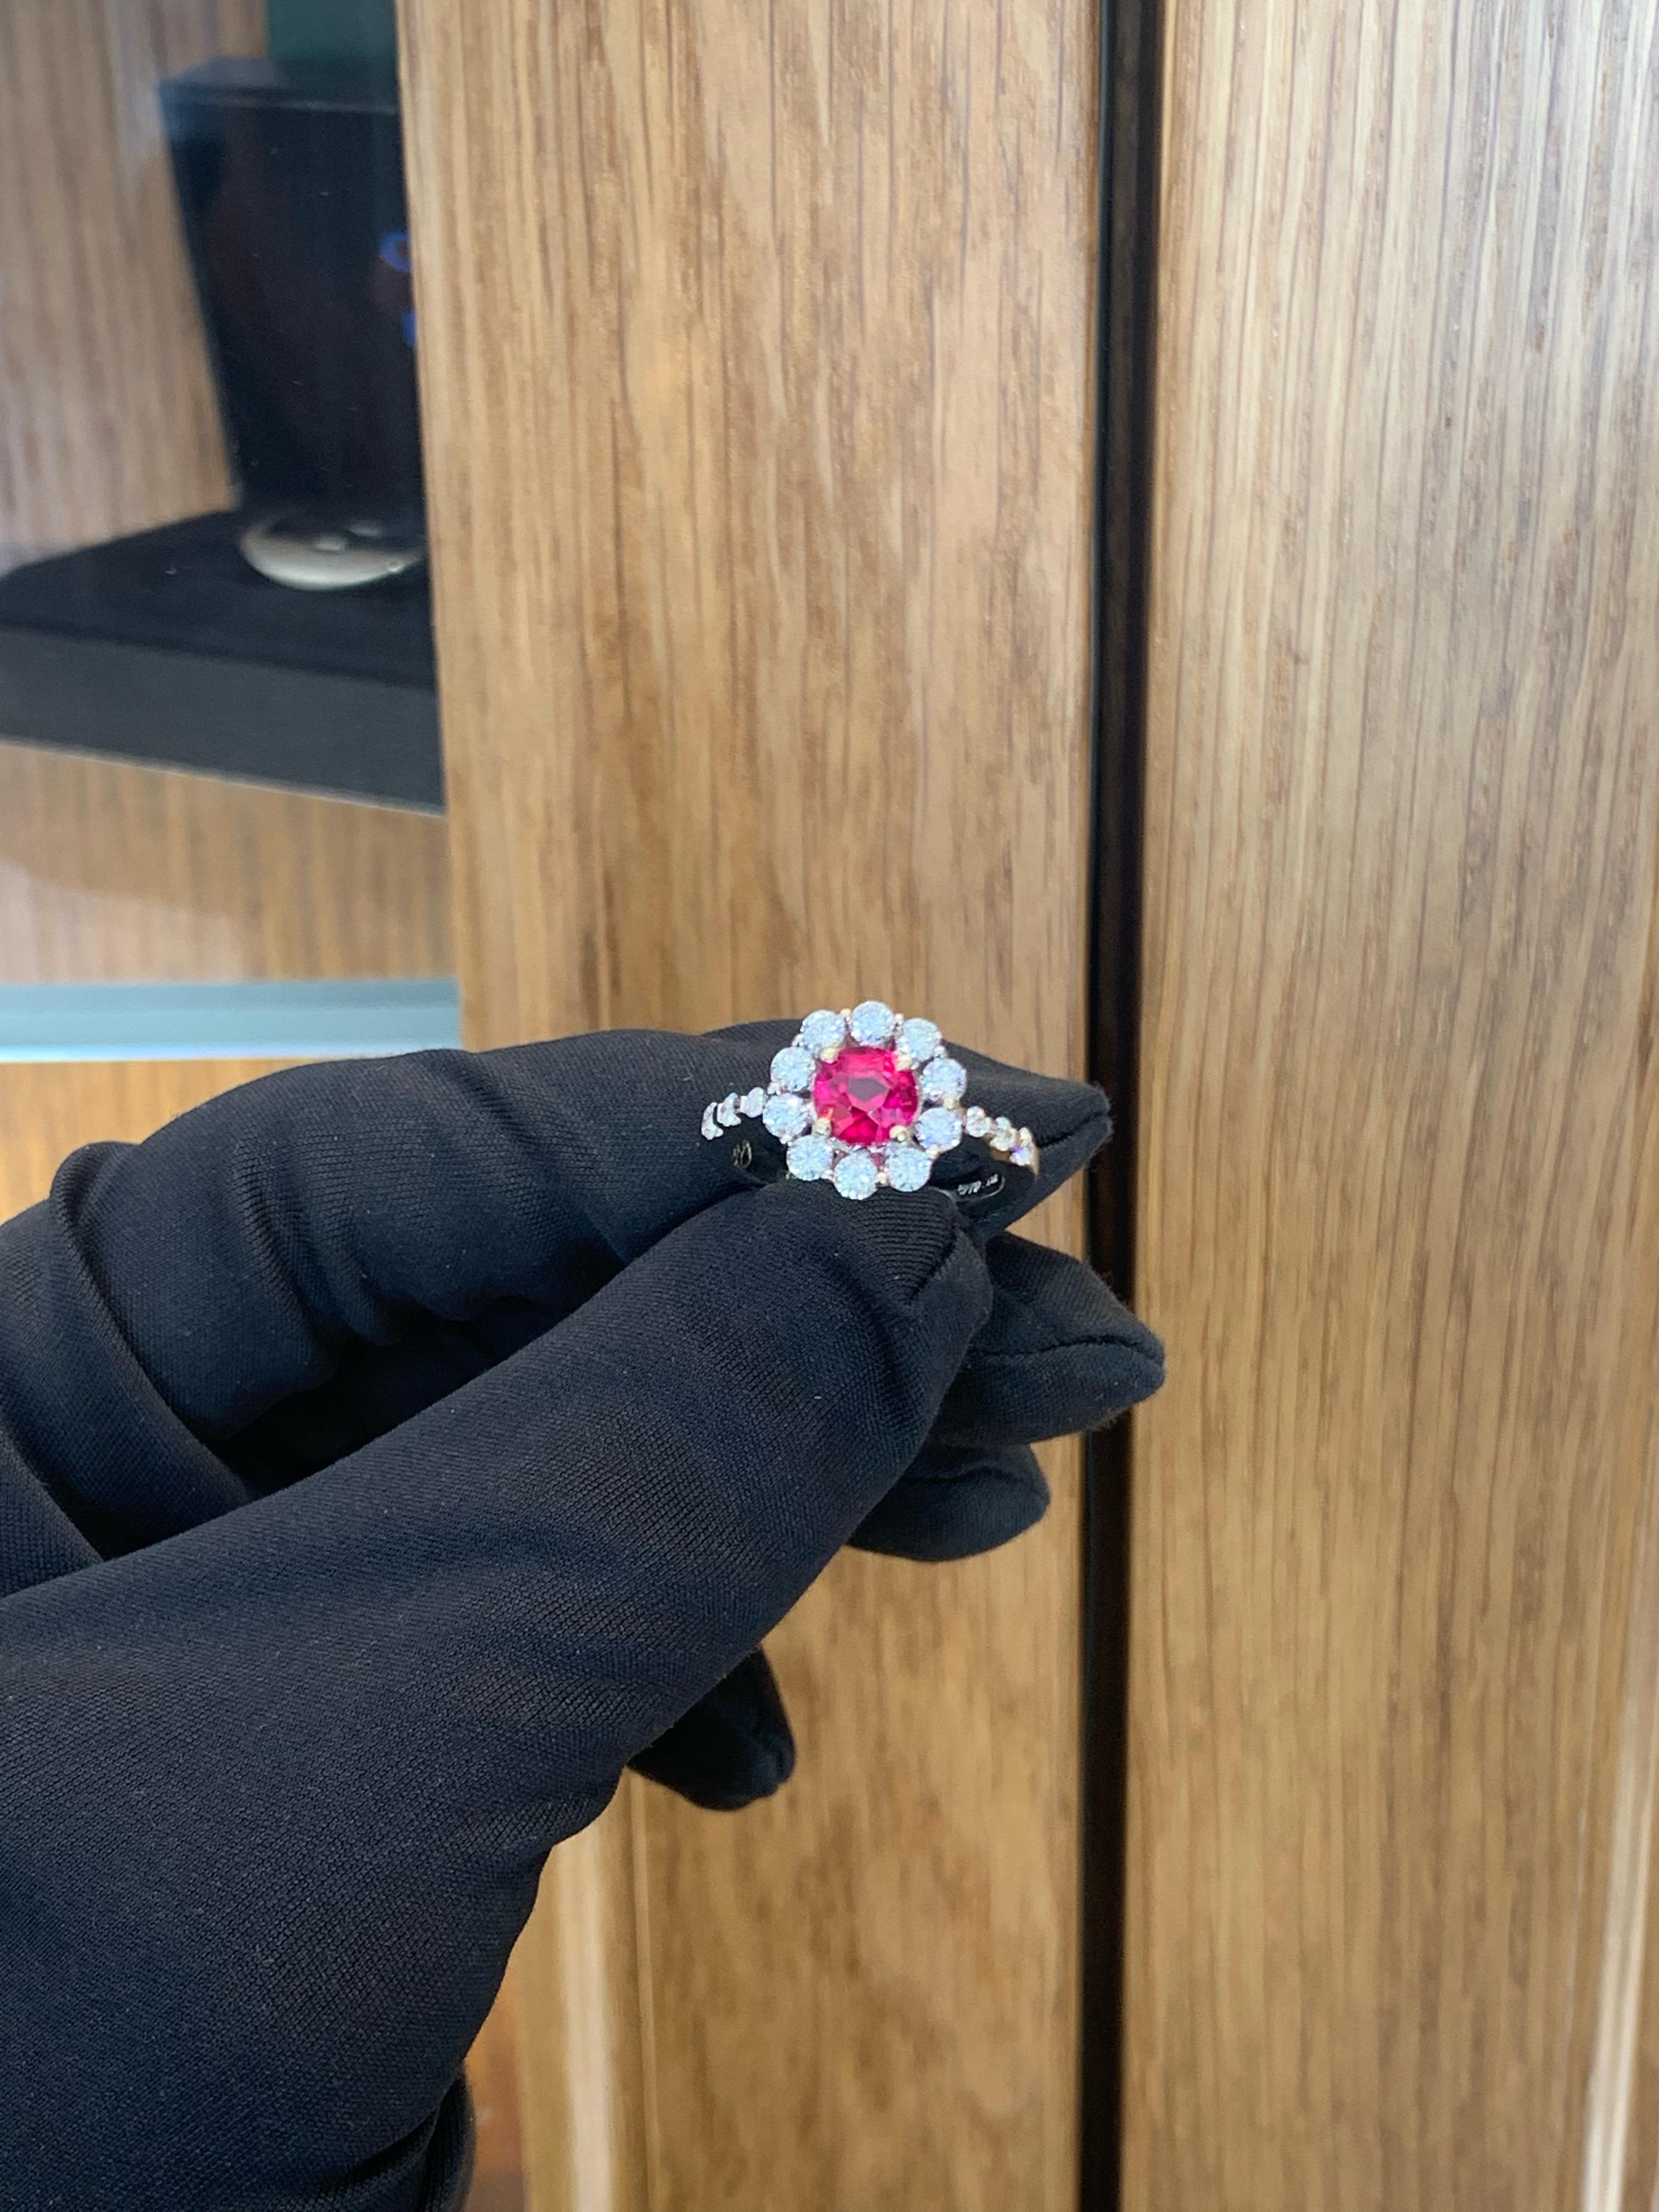 Beautifully Hand Crafted 18k White Gold Ruby & Diamond Ring.
Famous Halo Setting.
Amazing Shine, Incredible Craftsmanship.
Great Statement Piece.
Beautiful Flower Design.
Approximately 1.50 Carats Ruby.
Approximately 1.20 Carats Of Diamonds.
Nice &